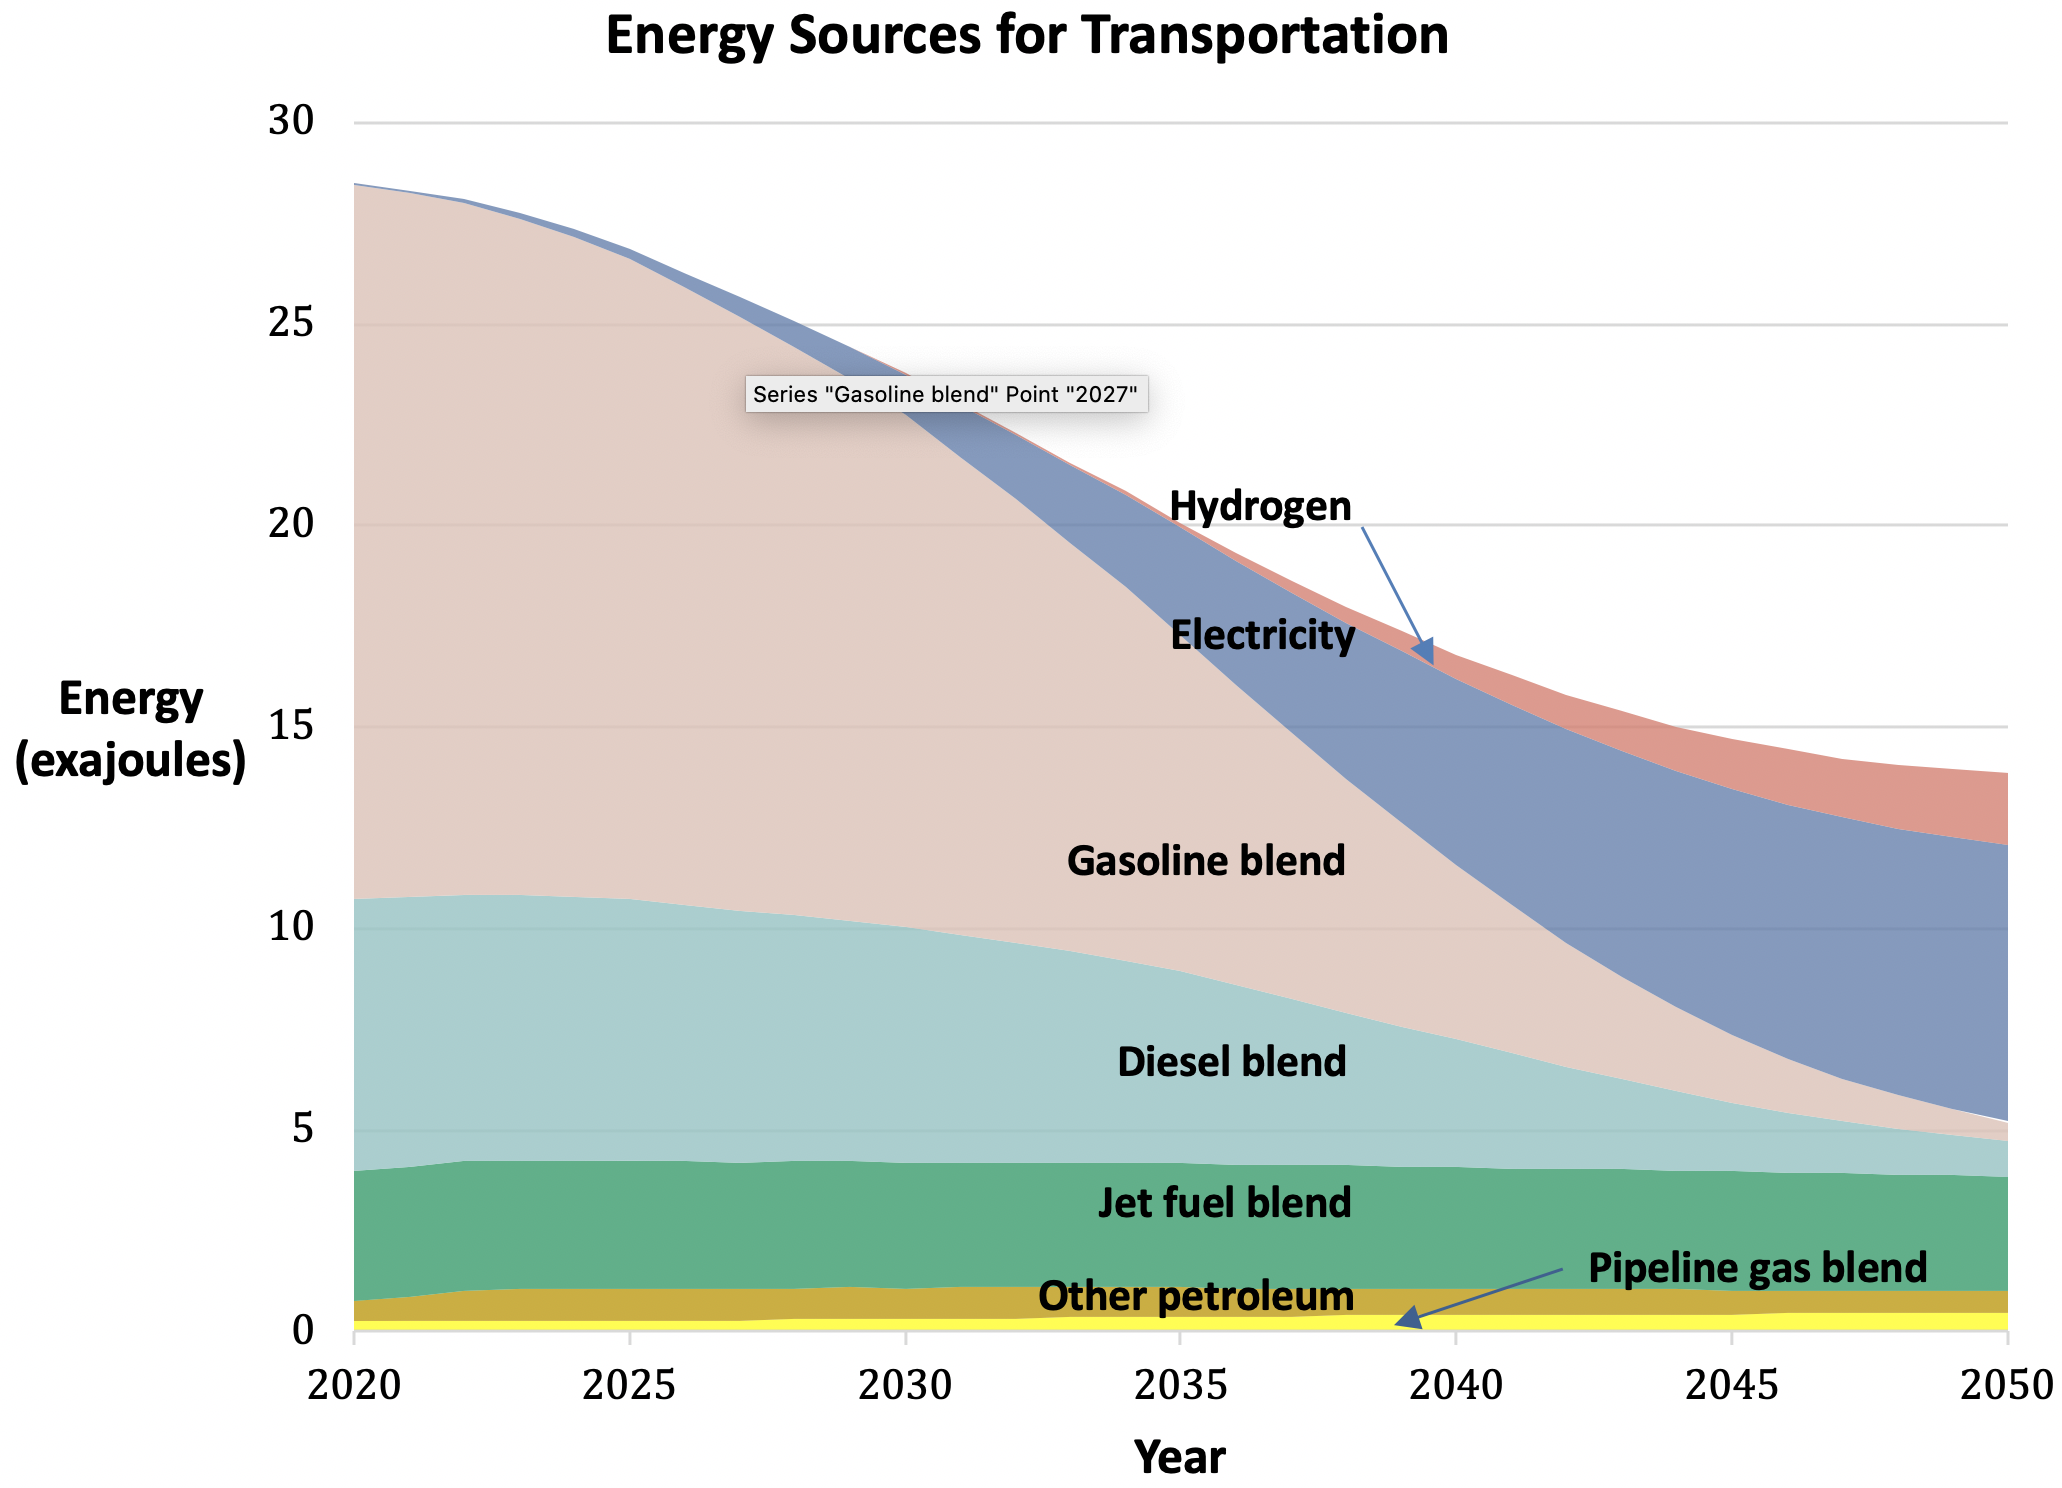 Graph of Energy Sources for Transportation